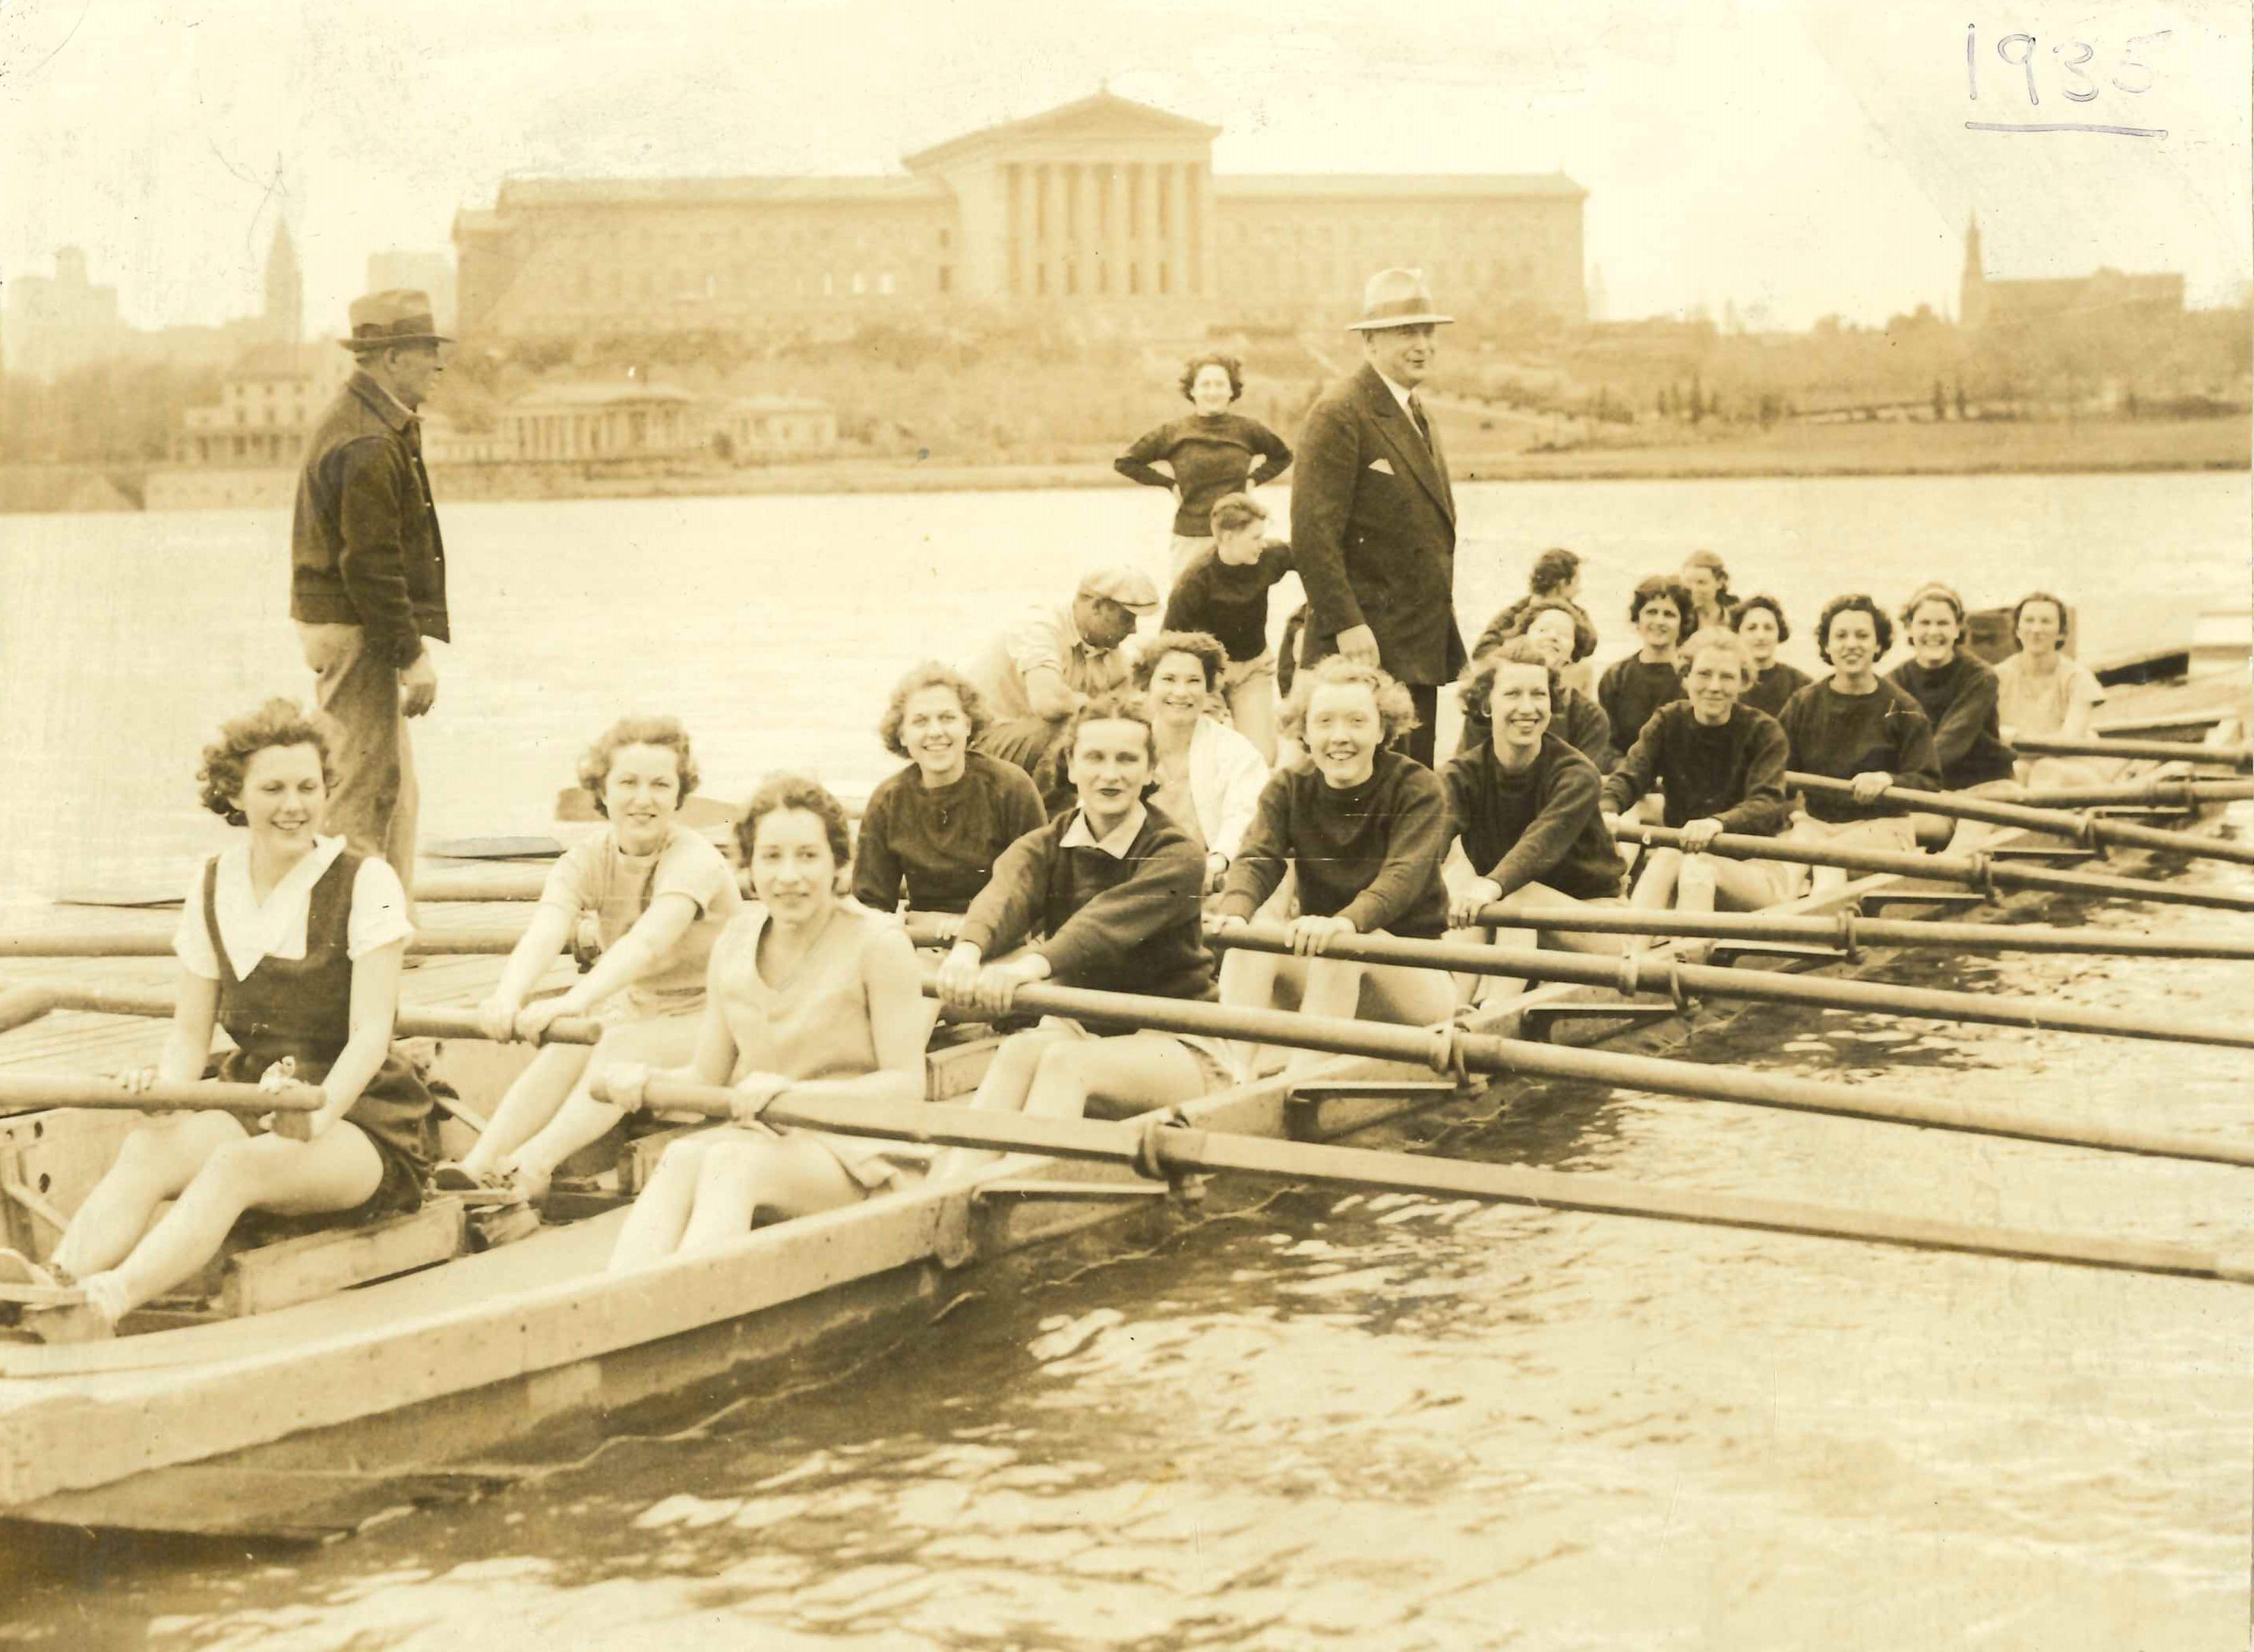 A crew team made up of women on the Schuykill River moored at a dock, with several people standing or crouched behind them. In the background is the Philadephia Museum of Art. in the top right is the underlined number "1935", handwritten and faded.